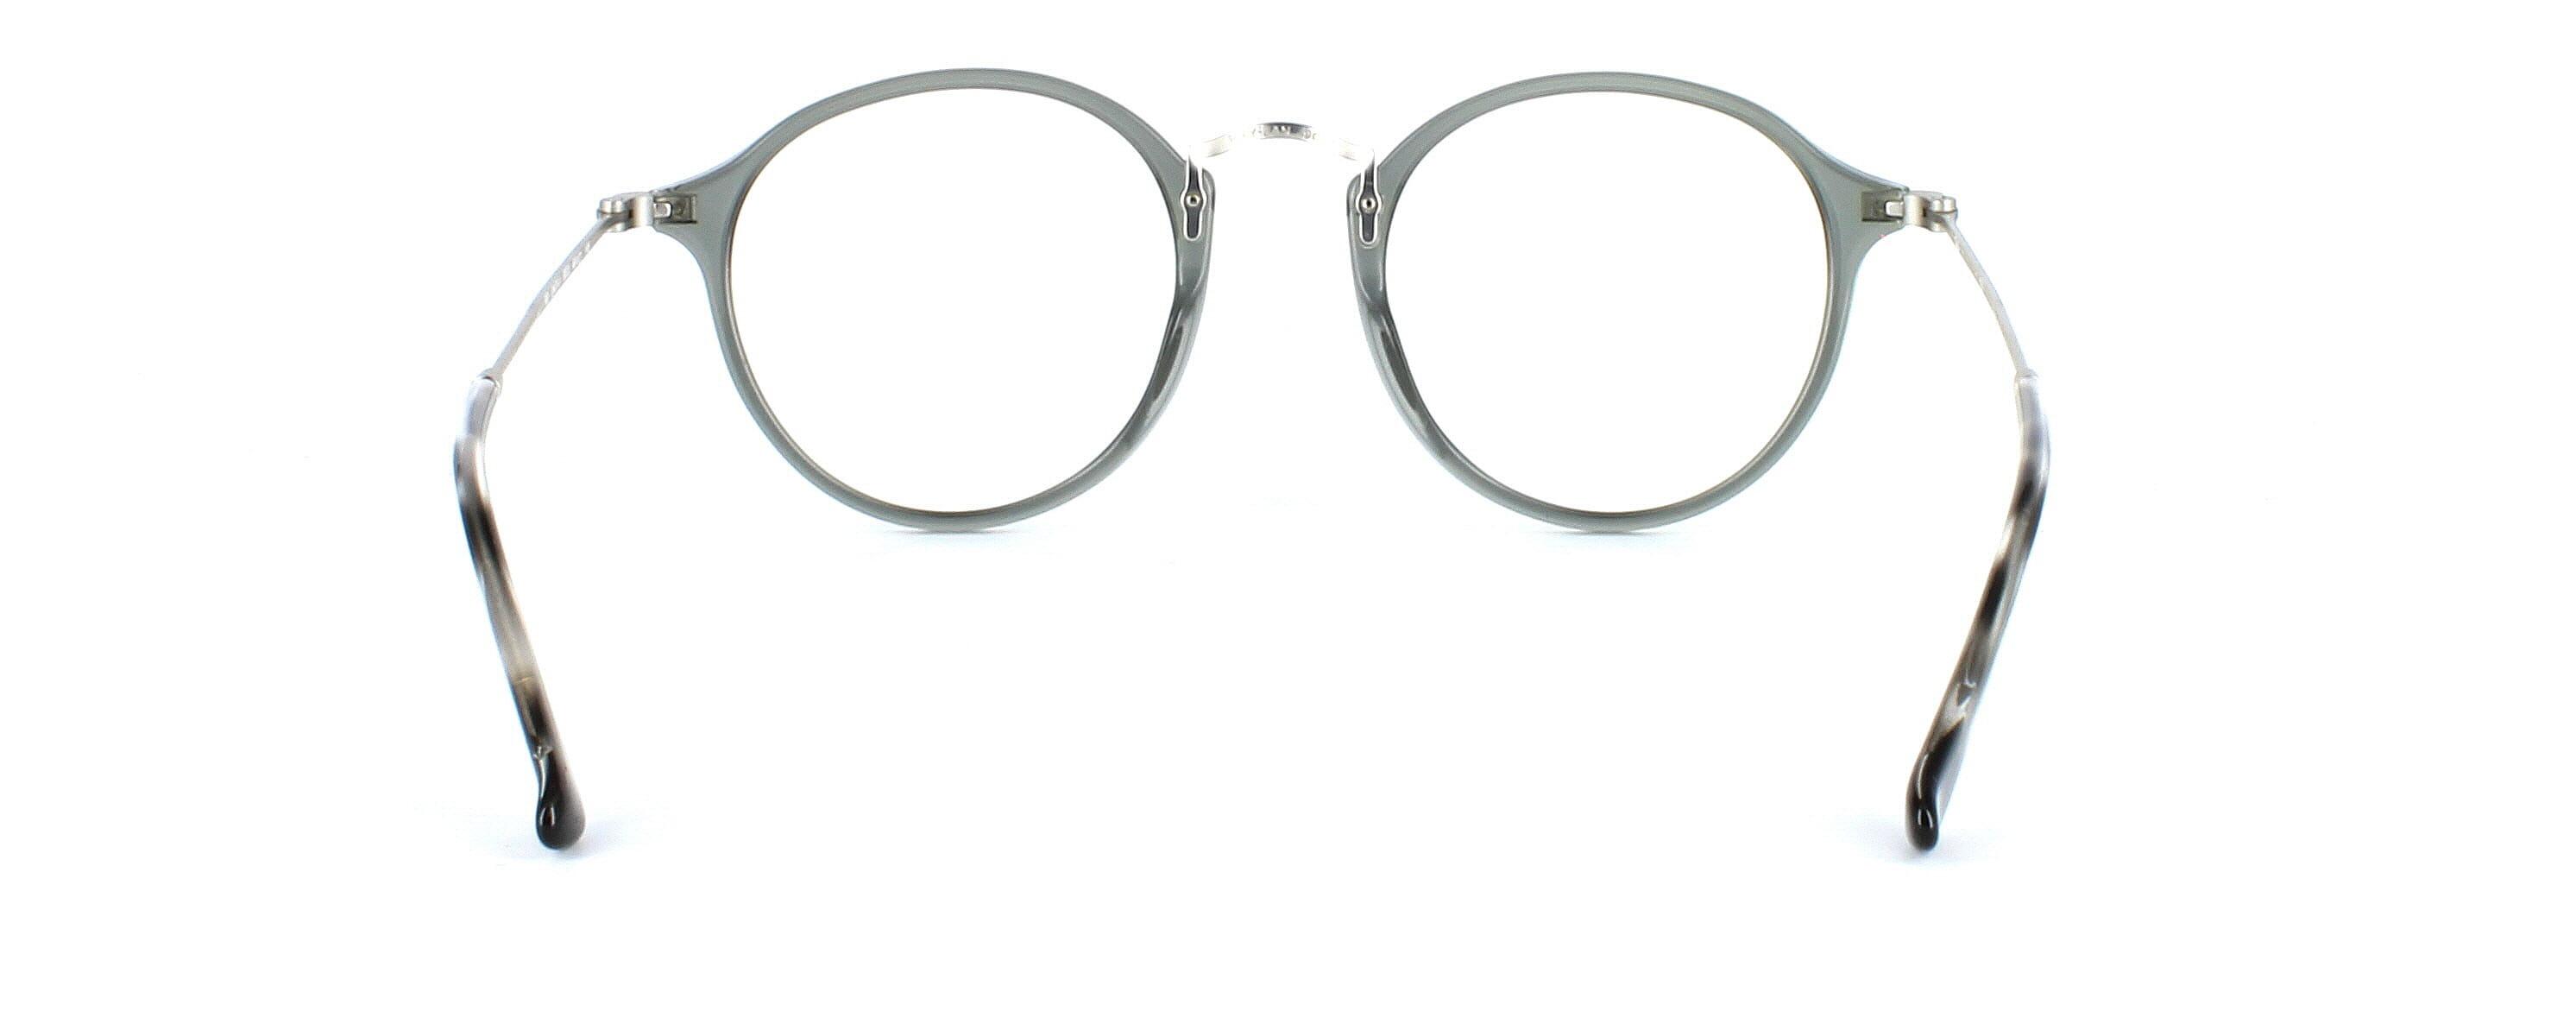 Ray Ban 2447 - Crystal Grey - Ladies round shaped glasses - image view 4